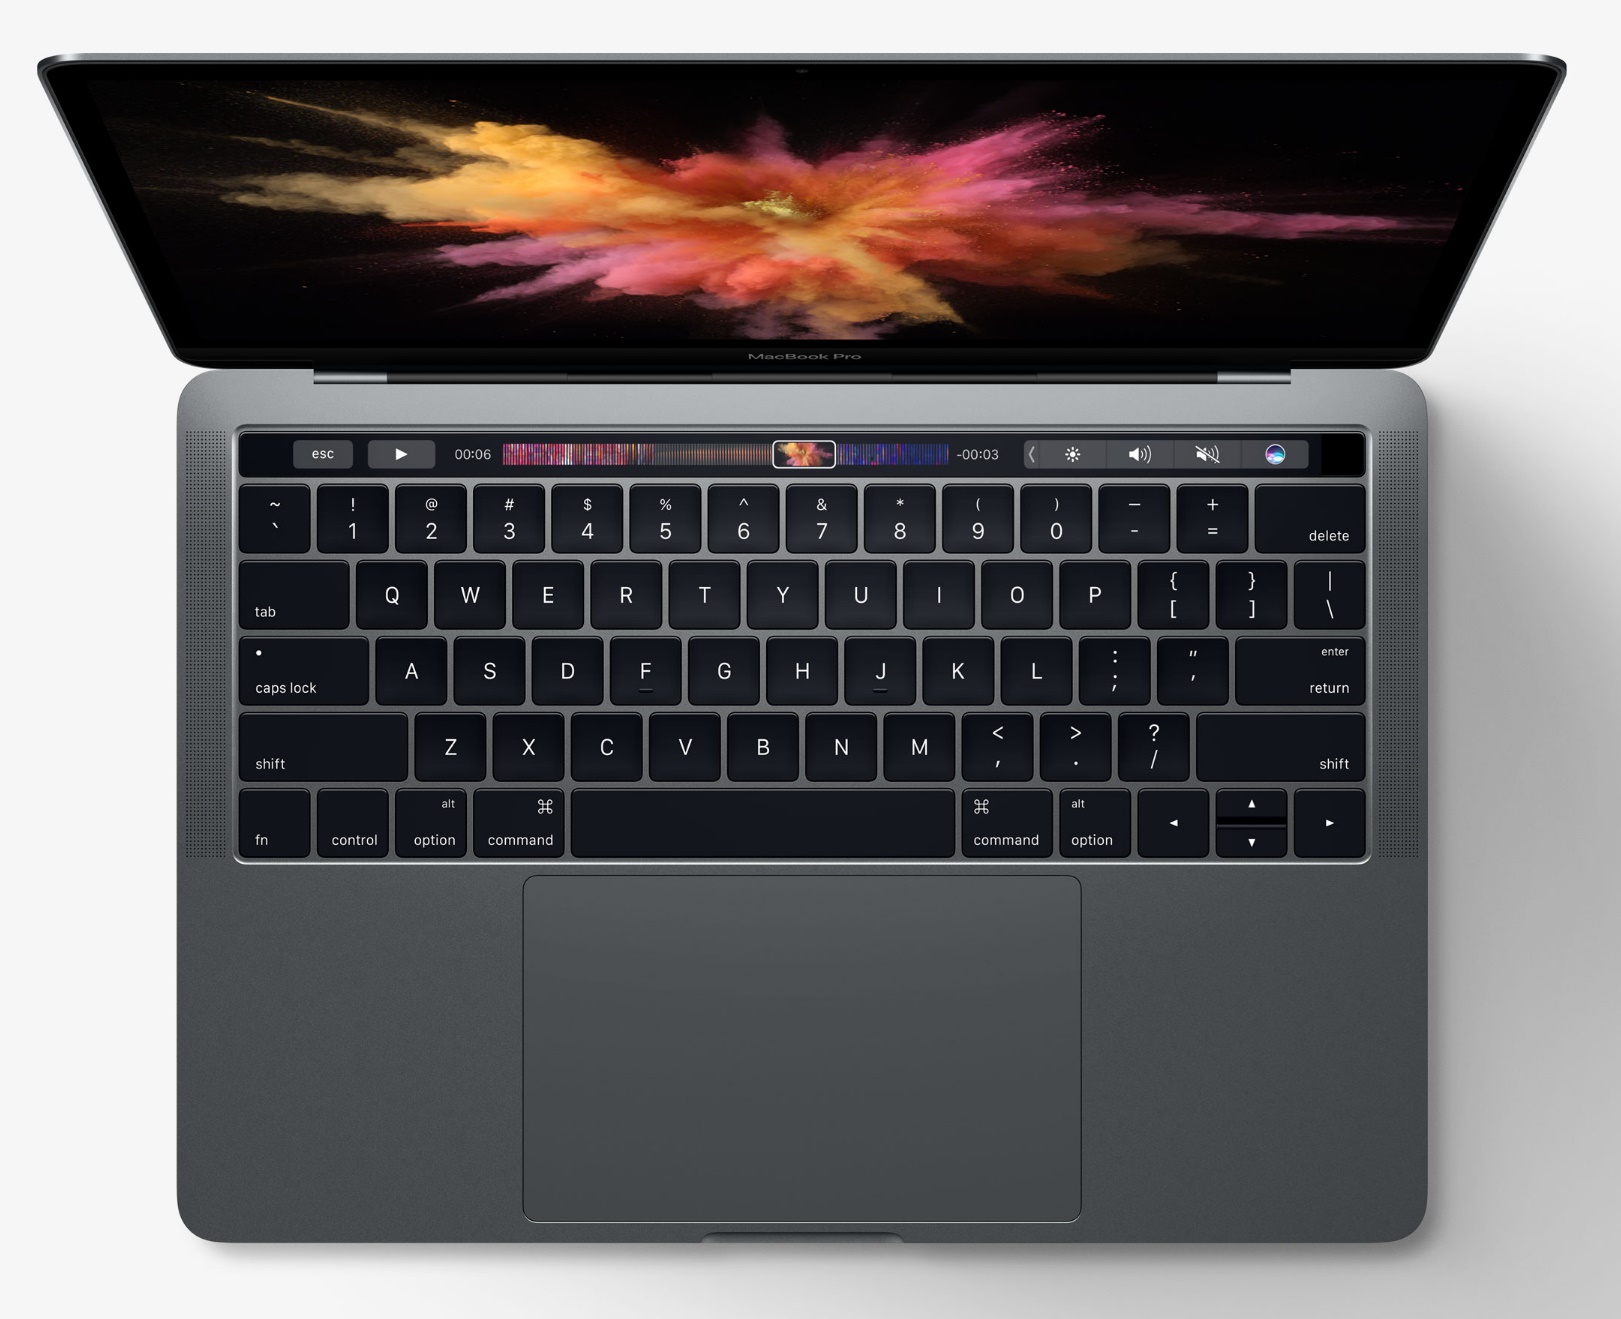 The New MacBook Pro with Touch Bar is finally here